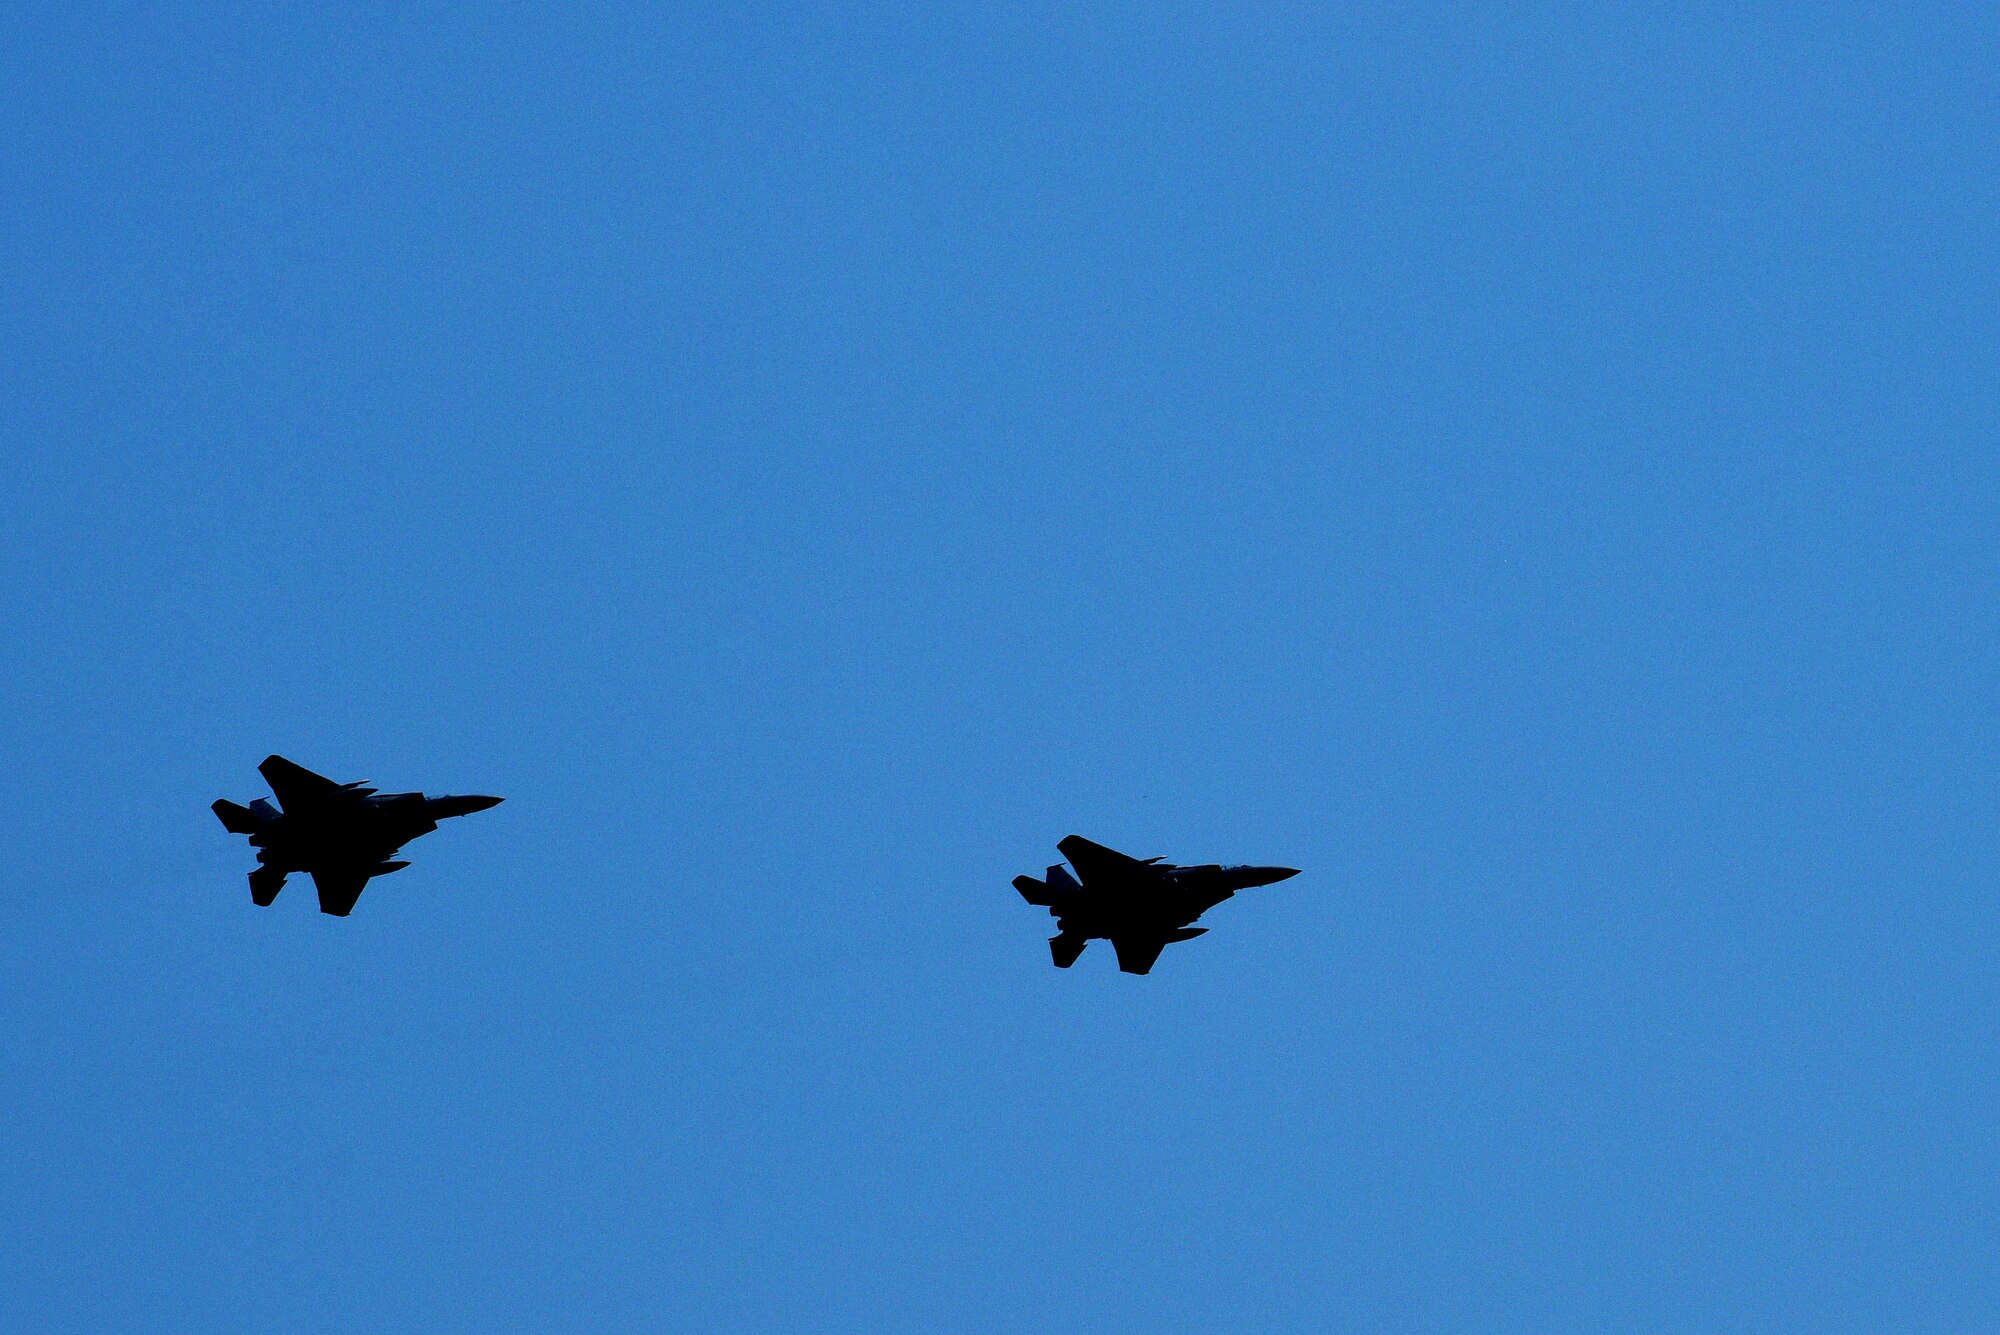 Two F-15E Strike Eagles fly overhead during Exercise Thunderdome 17-02, July 21, 2017, at Seymour Johnson Air Force Base, North Carolina. The exercise scenario tested the wing’s ability to conduct a necessary rapid and appropriate response without any prior coordination. (U.S. Air Force photo by Senior Airman Ashley Maldonado)